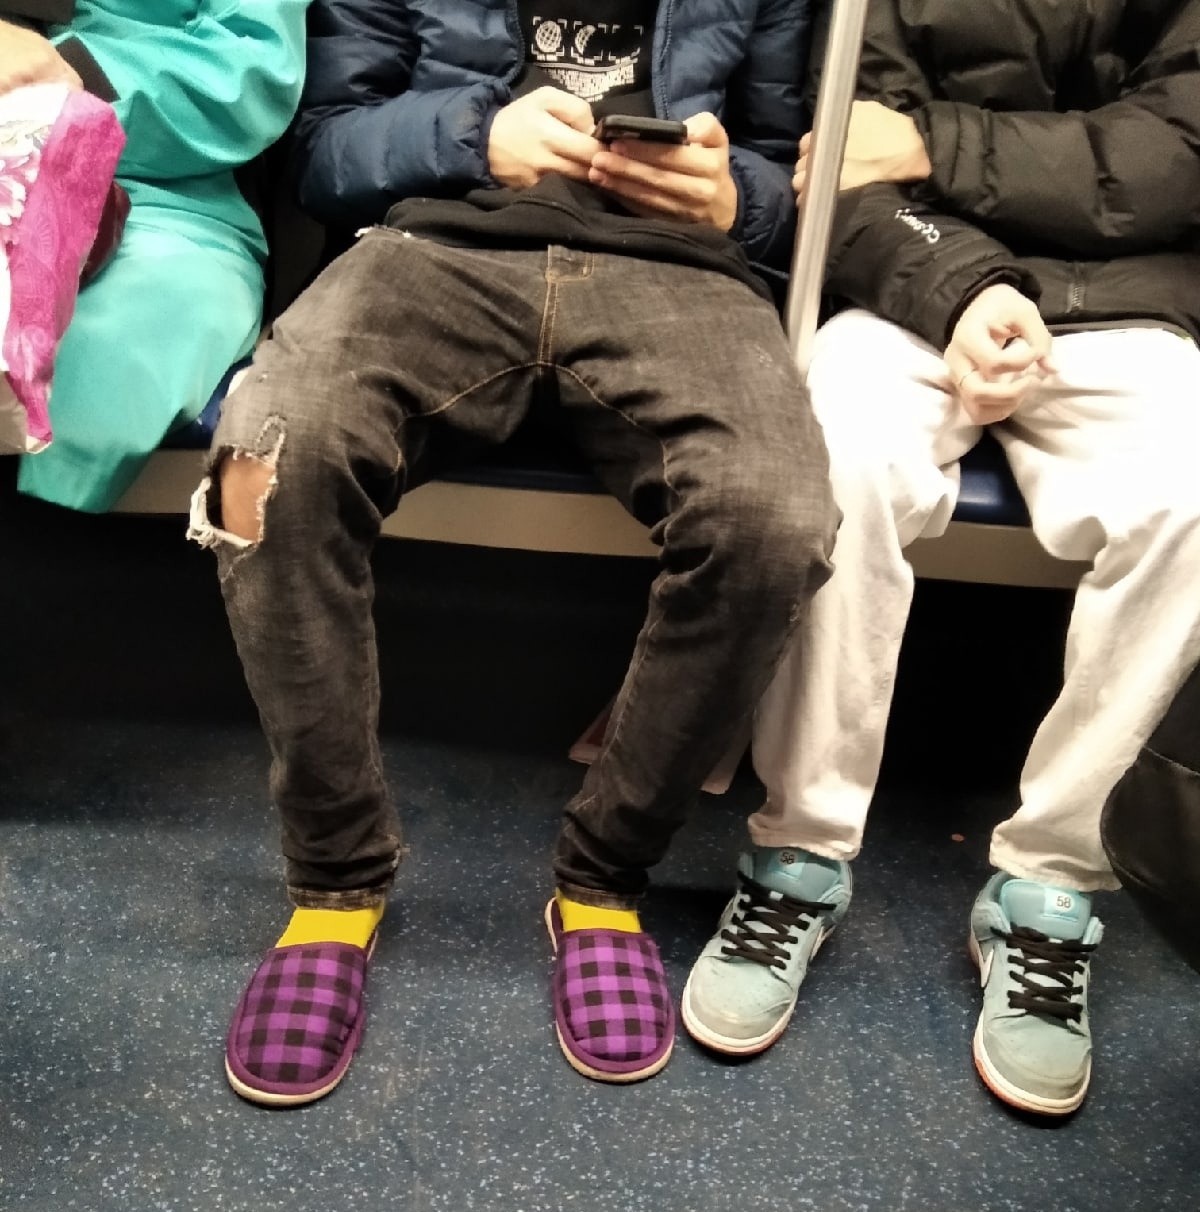 Strange People In The Subway, part 19